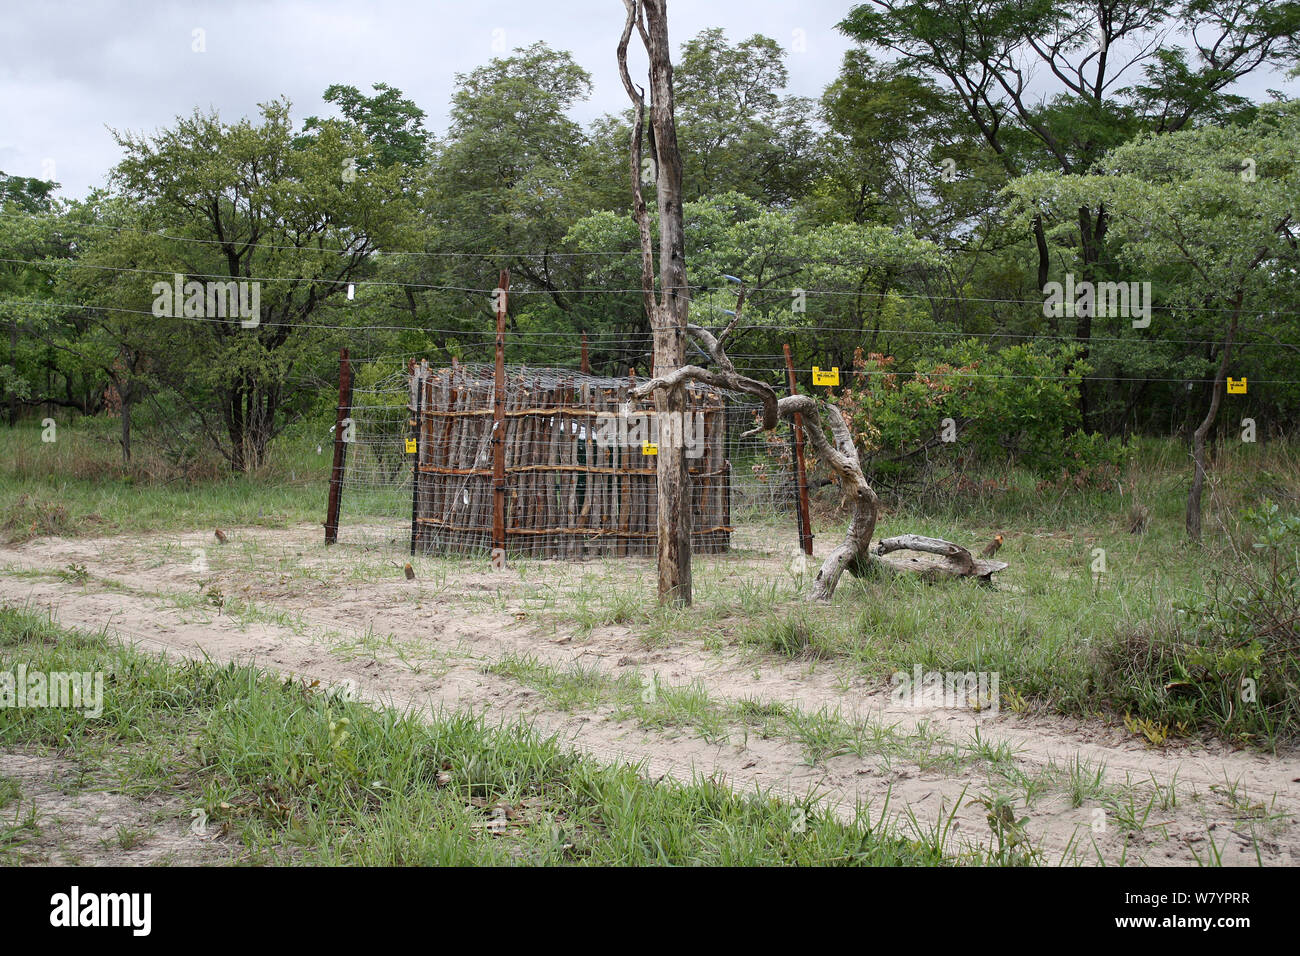 Elephant corridor with electric fence to keep away from local farms, Sioma Nqwezi Park, Zambia. November 2010. Stock Photo